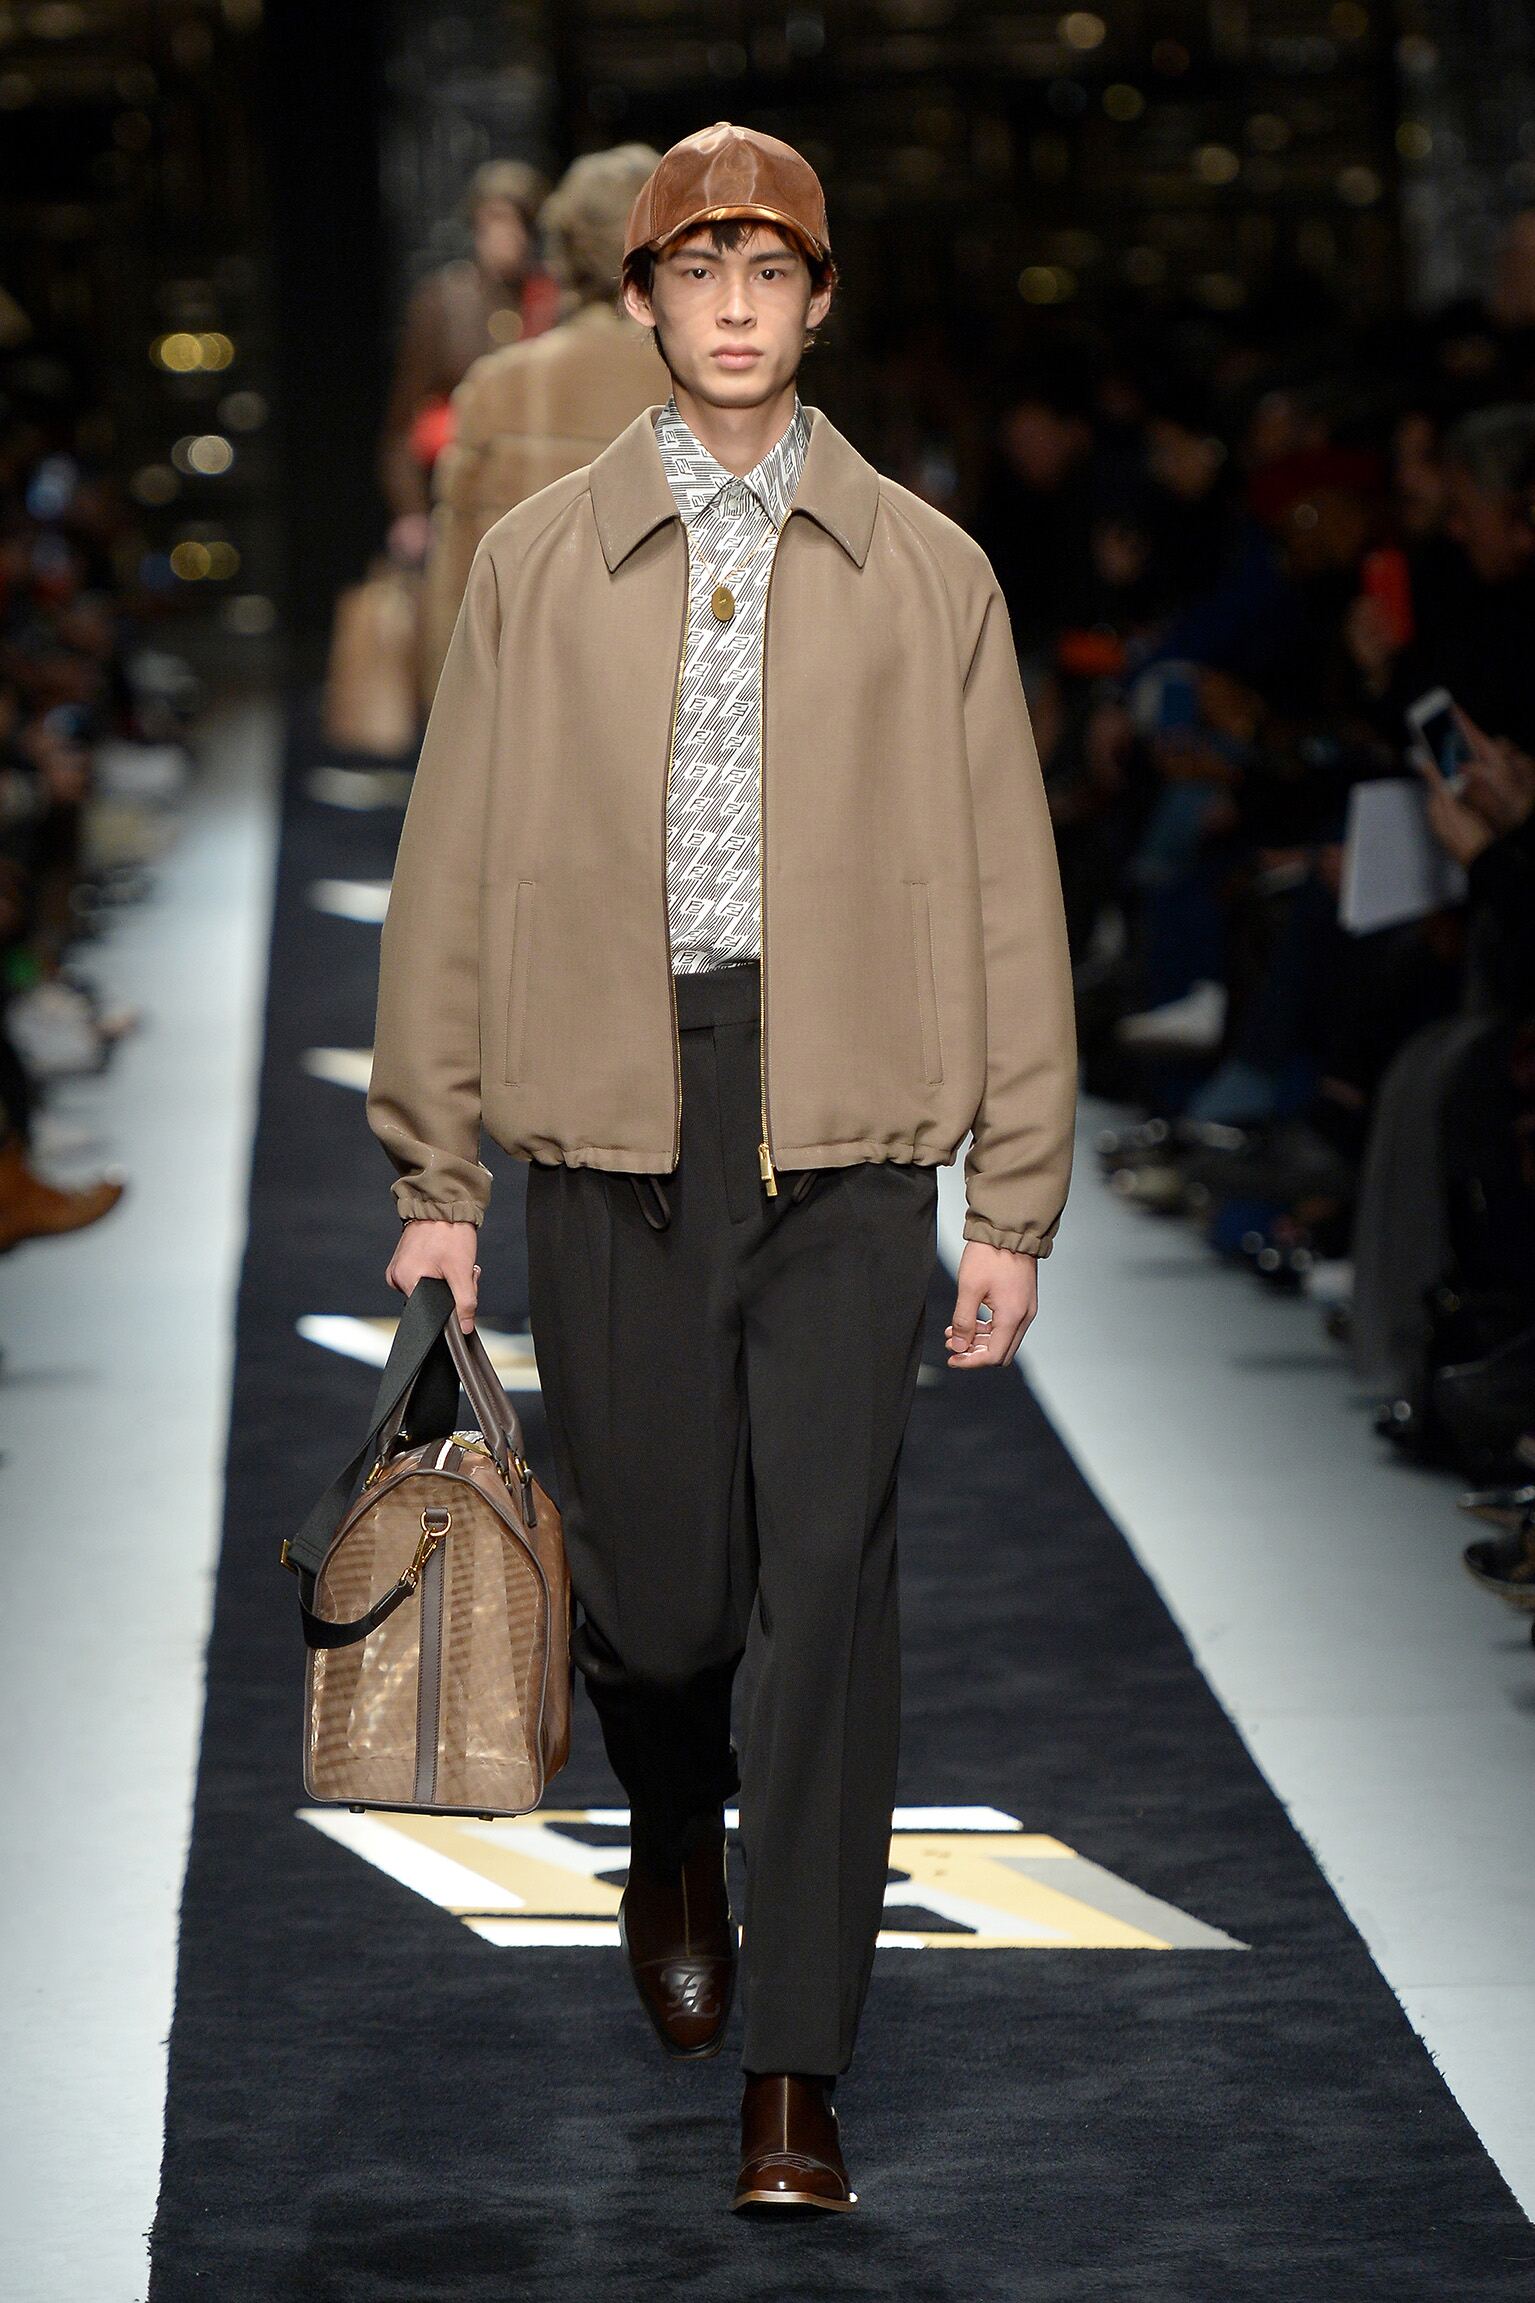 FENDI FALL WINTER 2019 MEN'S COLLECTION | The Skinny Beep